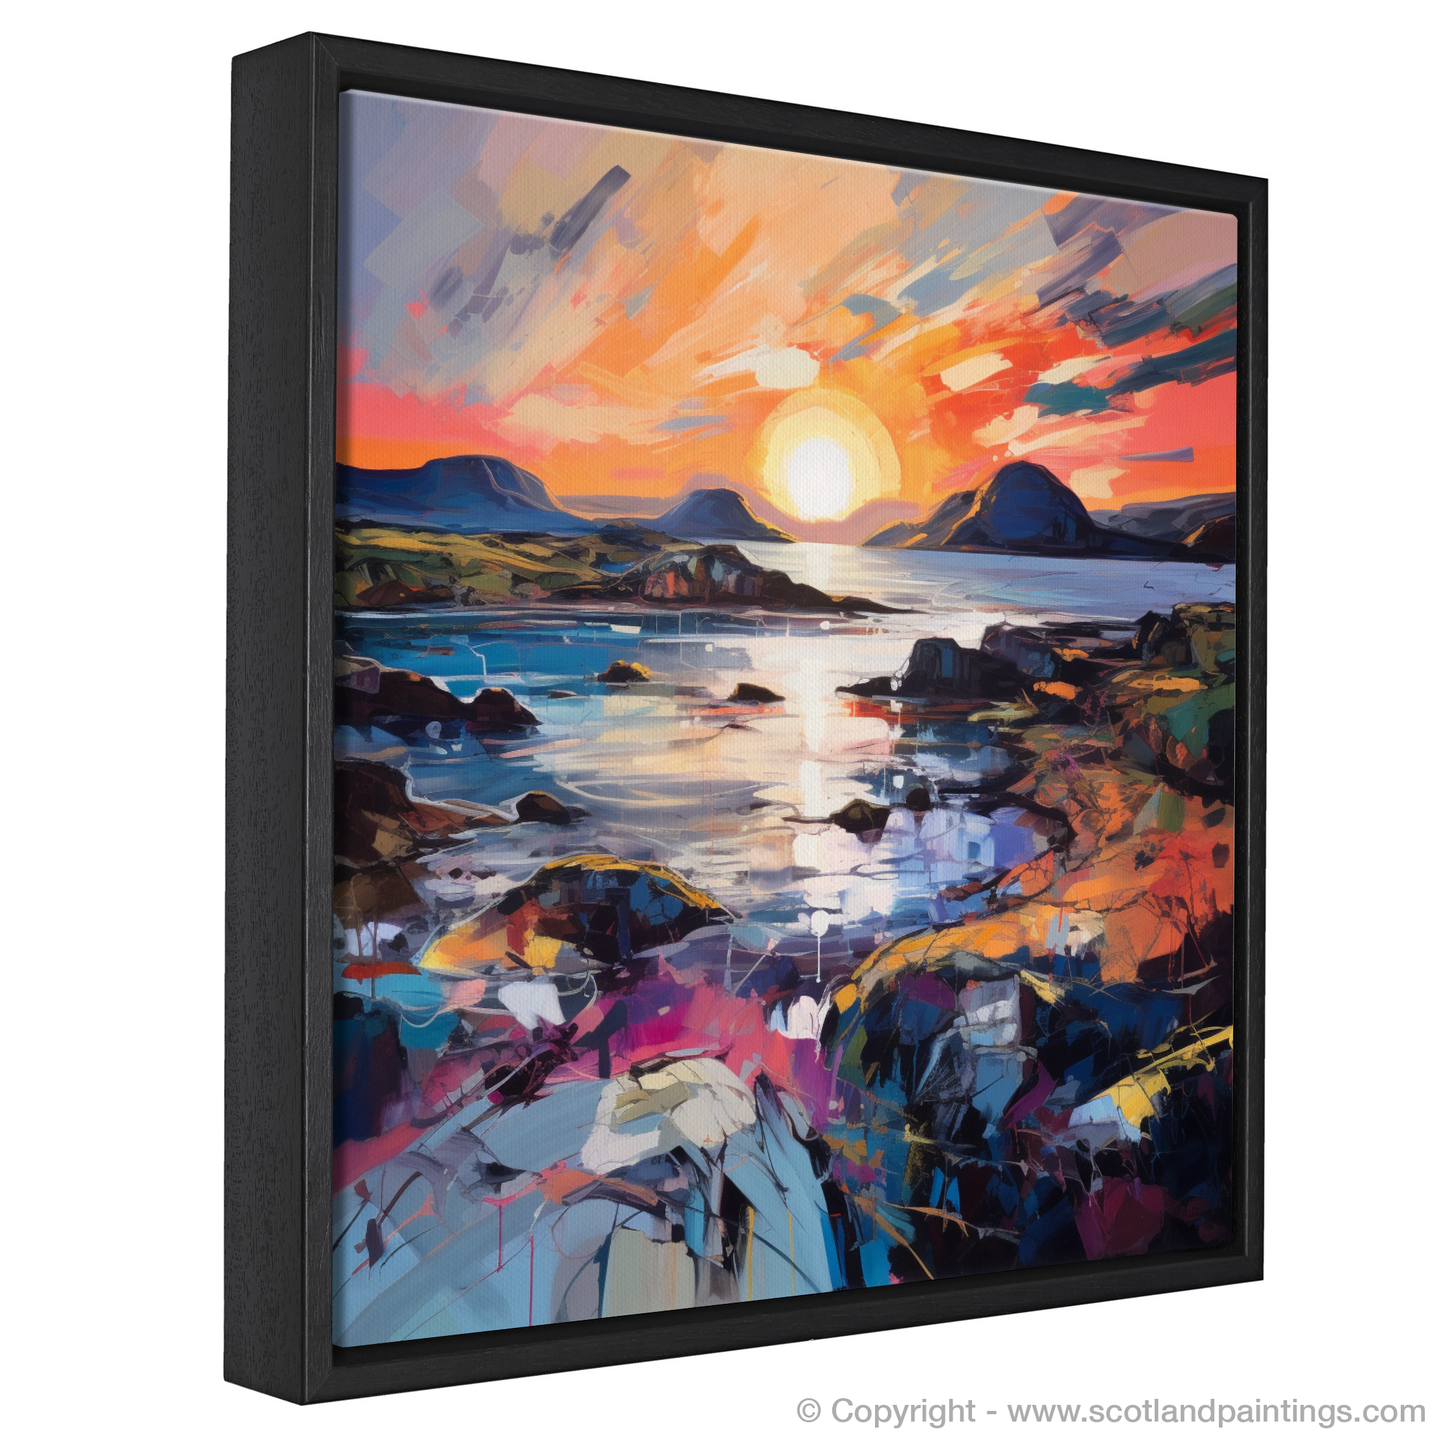 Painting and Art Print of Ardtun Bay at sunset entitled "Ardtun Bay Sunset Blaze: An Expressionist Ode to Scottish Coves".